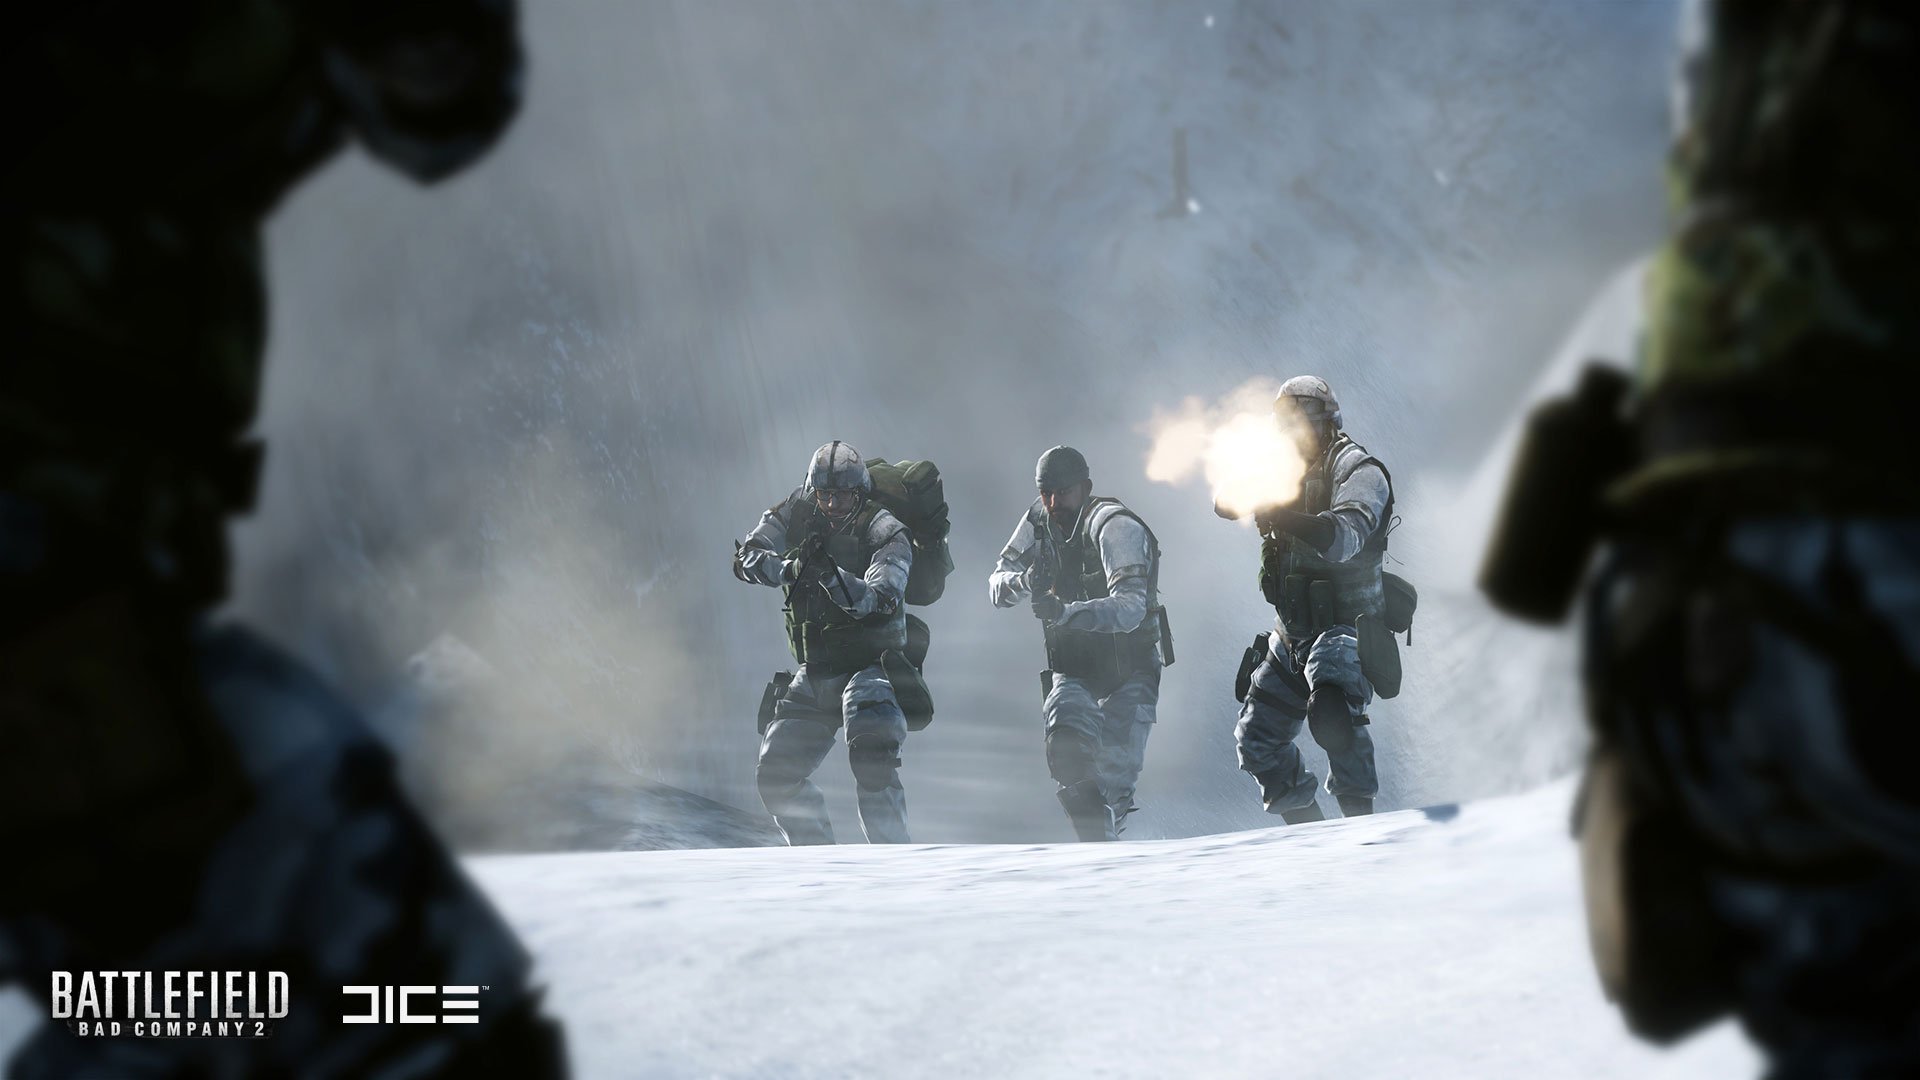 battlefield, Shooter, Tactical, Military, Action, Fighting, Warrior, Futuristic, Sci fi, Poster Wallpaper